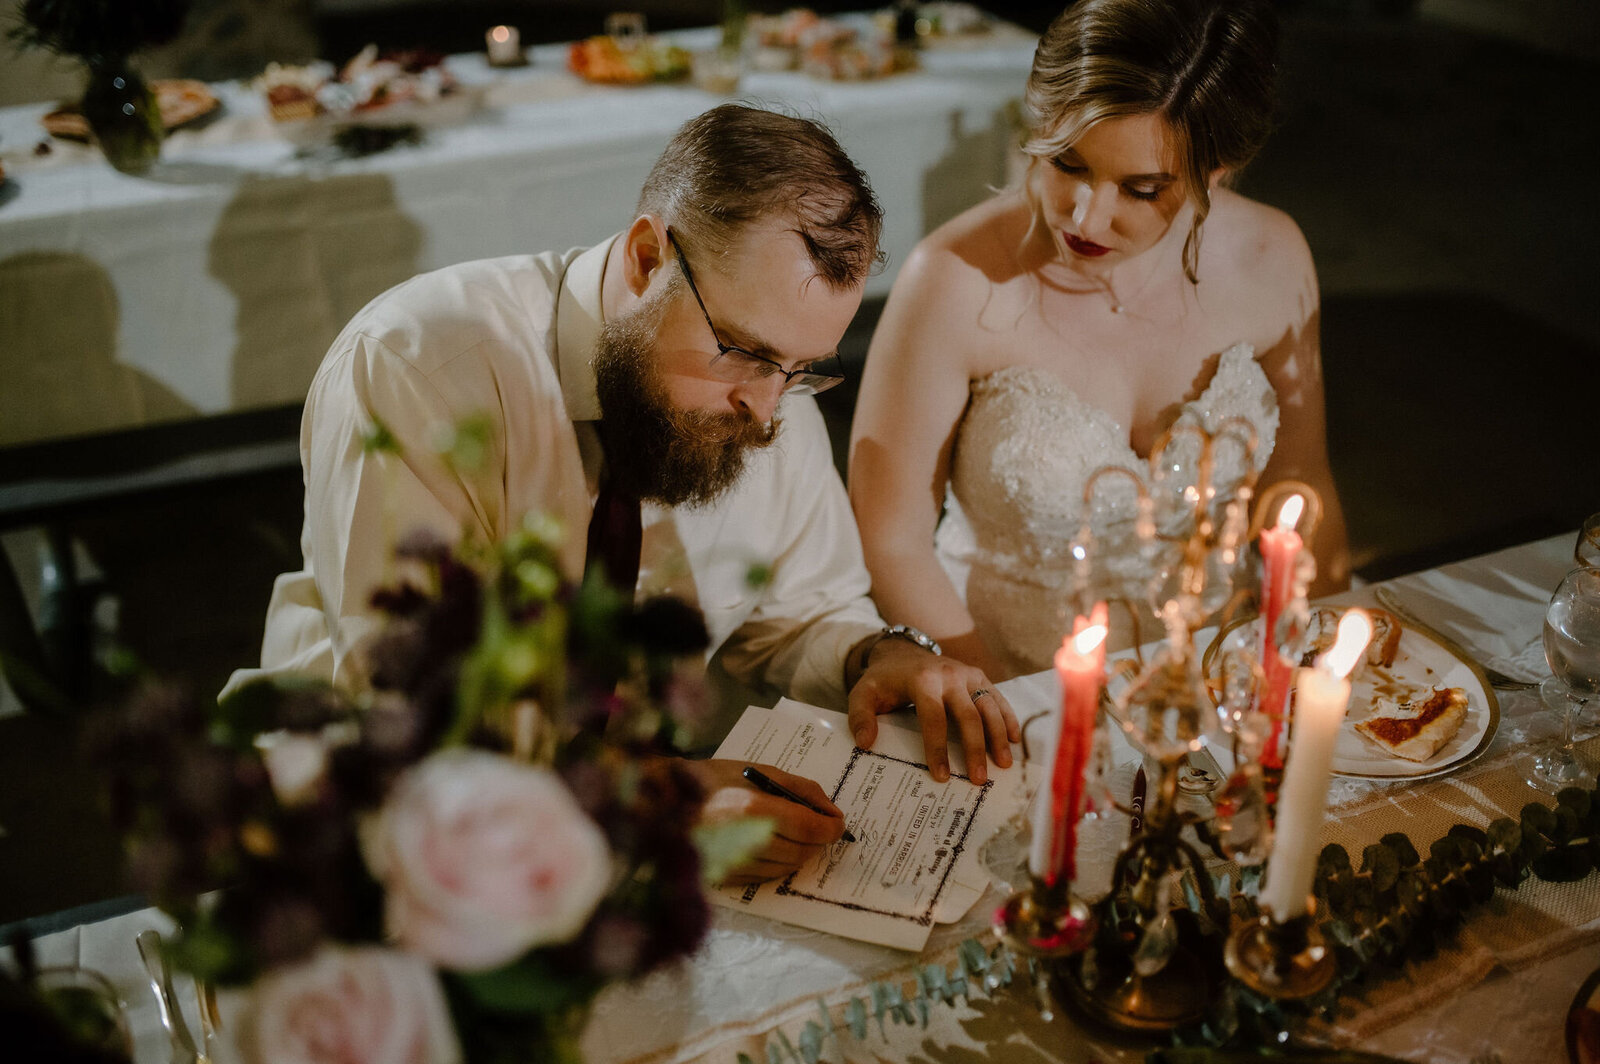 couple signing marriage license in candlelight at wedding reception table